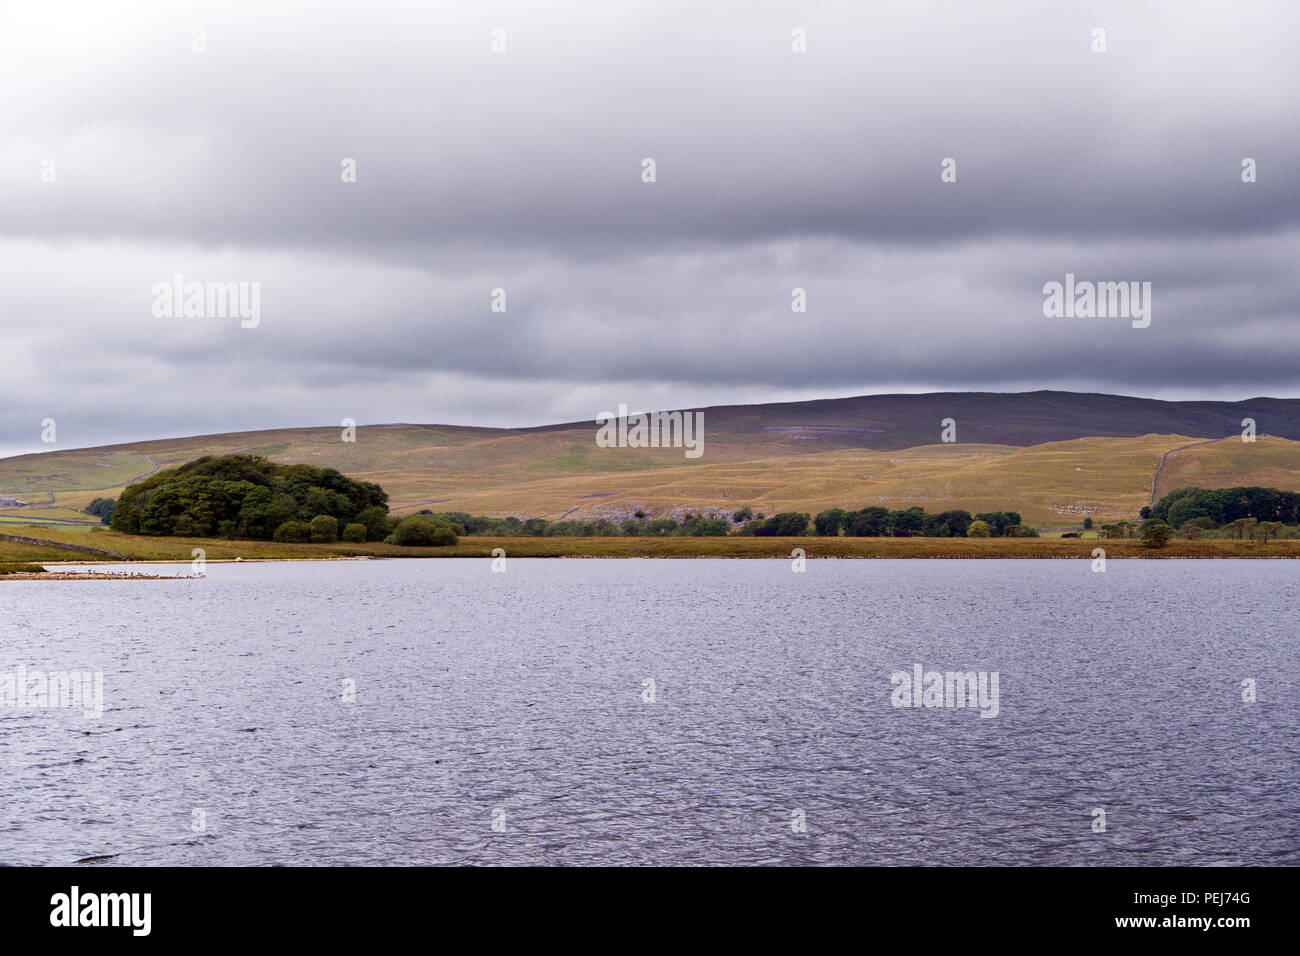 Malham Tarn is a glacial lake in the Yorkshire Dales. It is one of only eight upland alkaline lakes in Europe and is of major conservation interest. Stock Photo